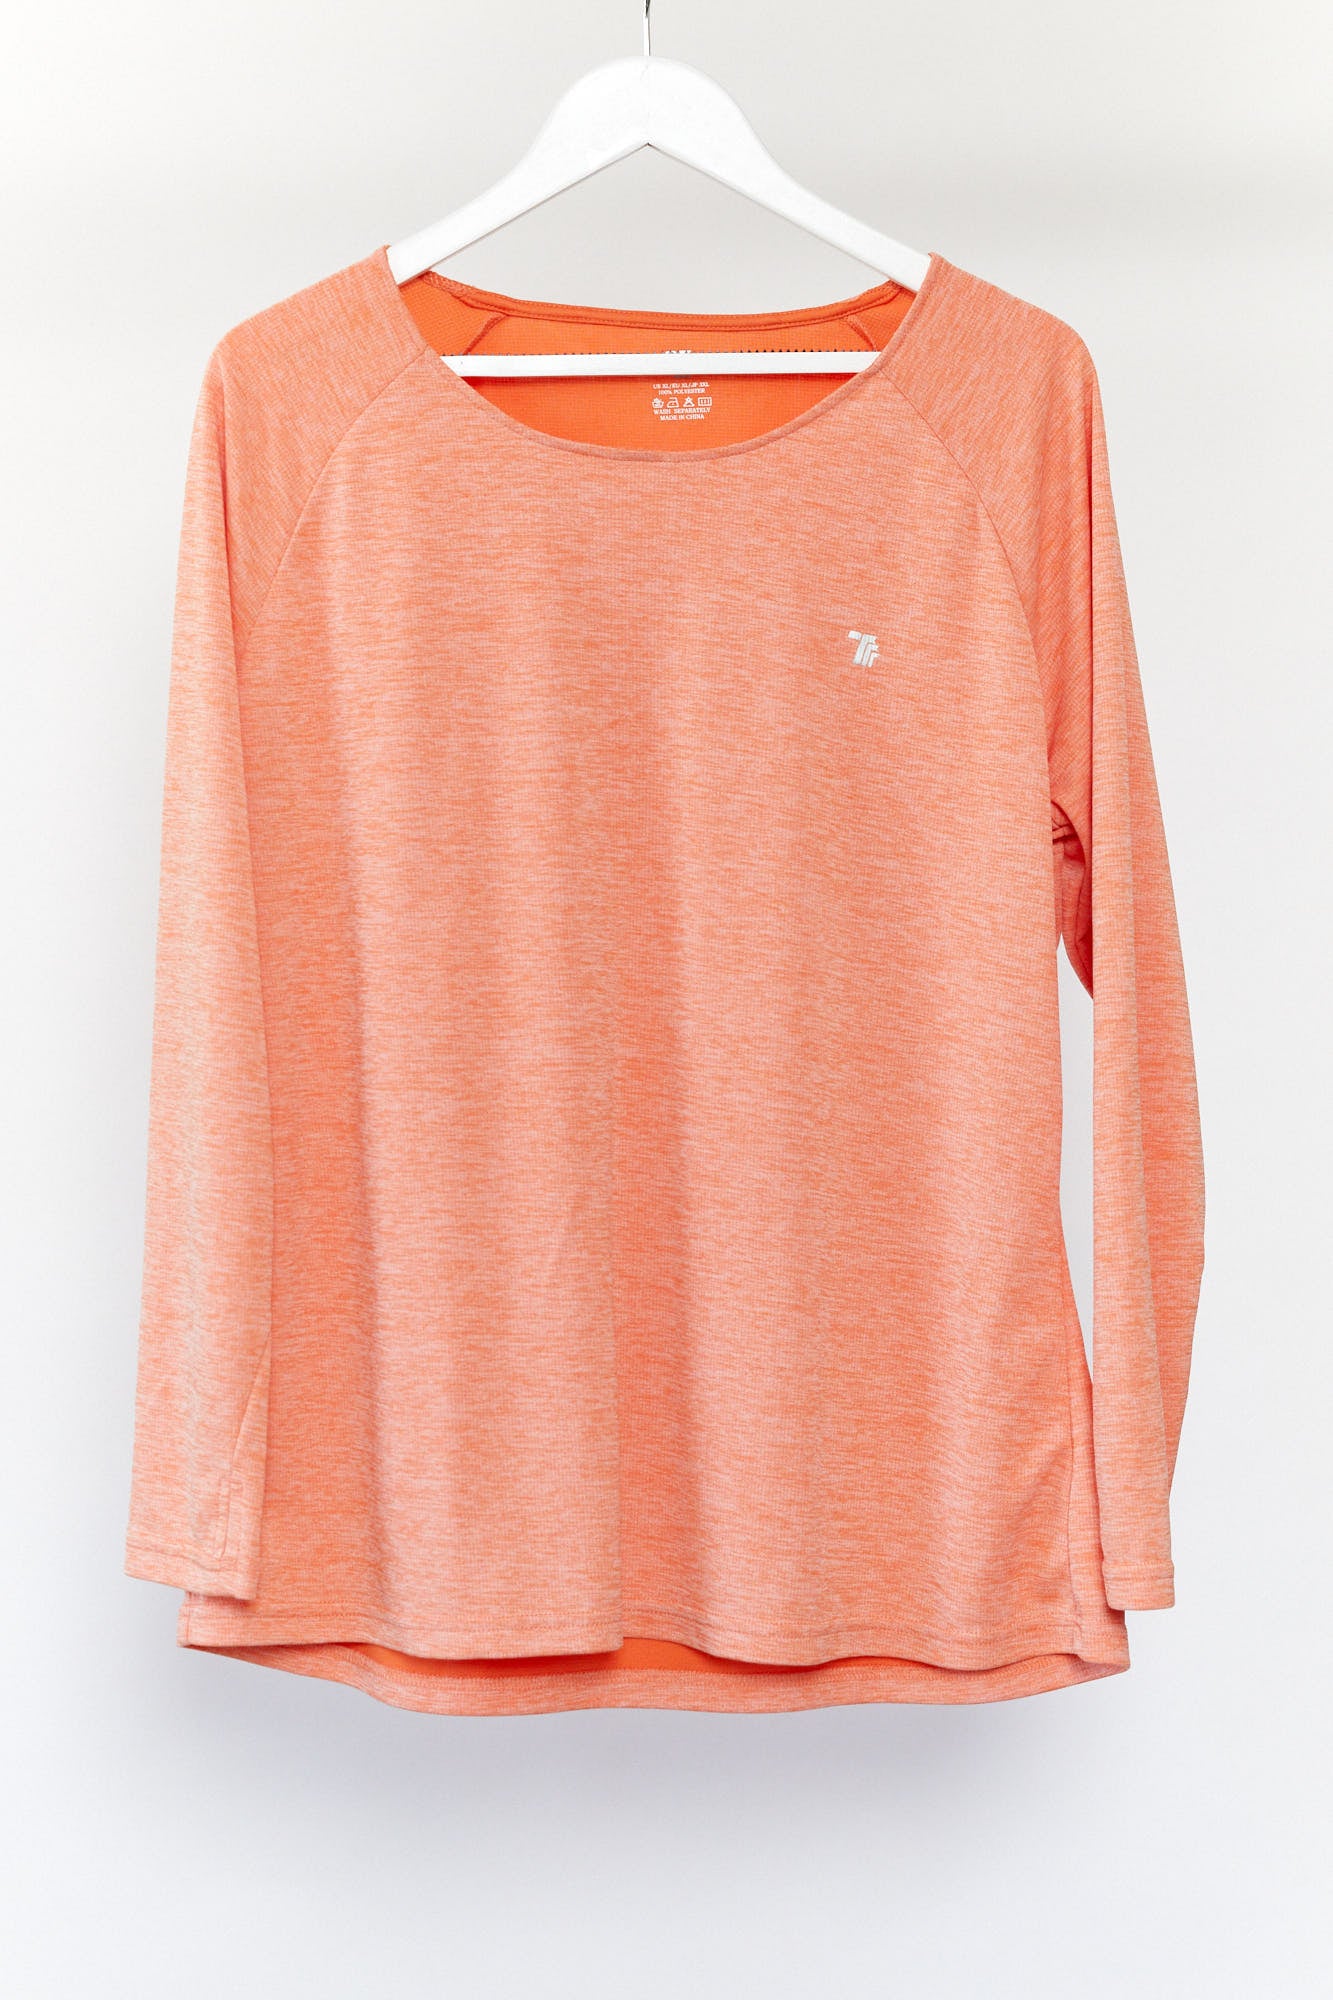 Womens Orange Wide Neck Sport Top Size Extra Large